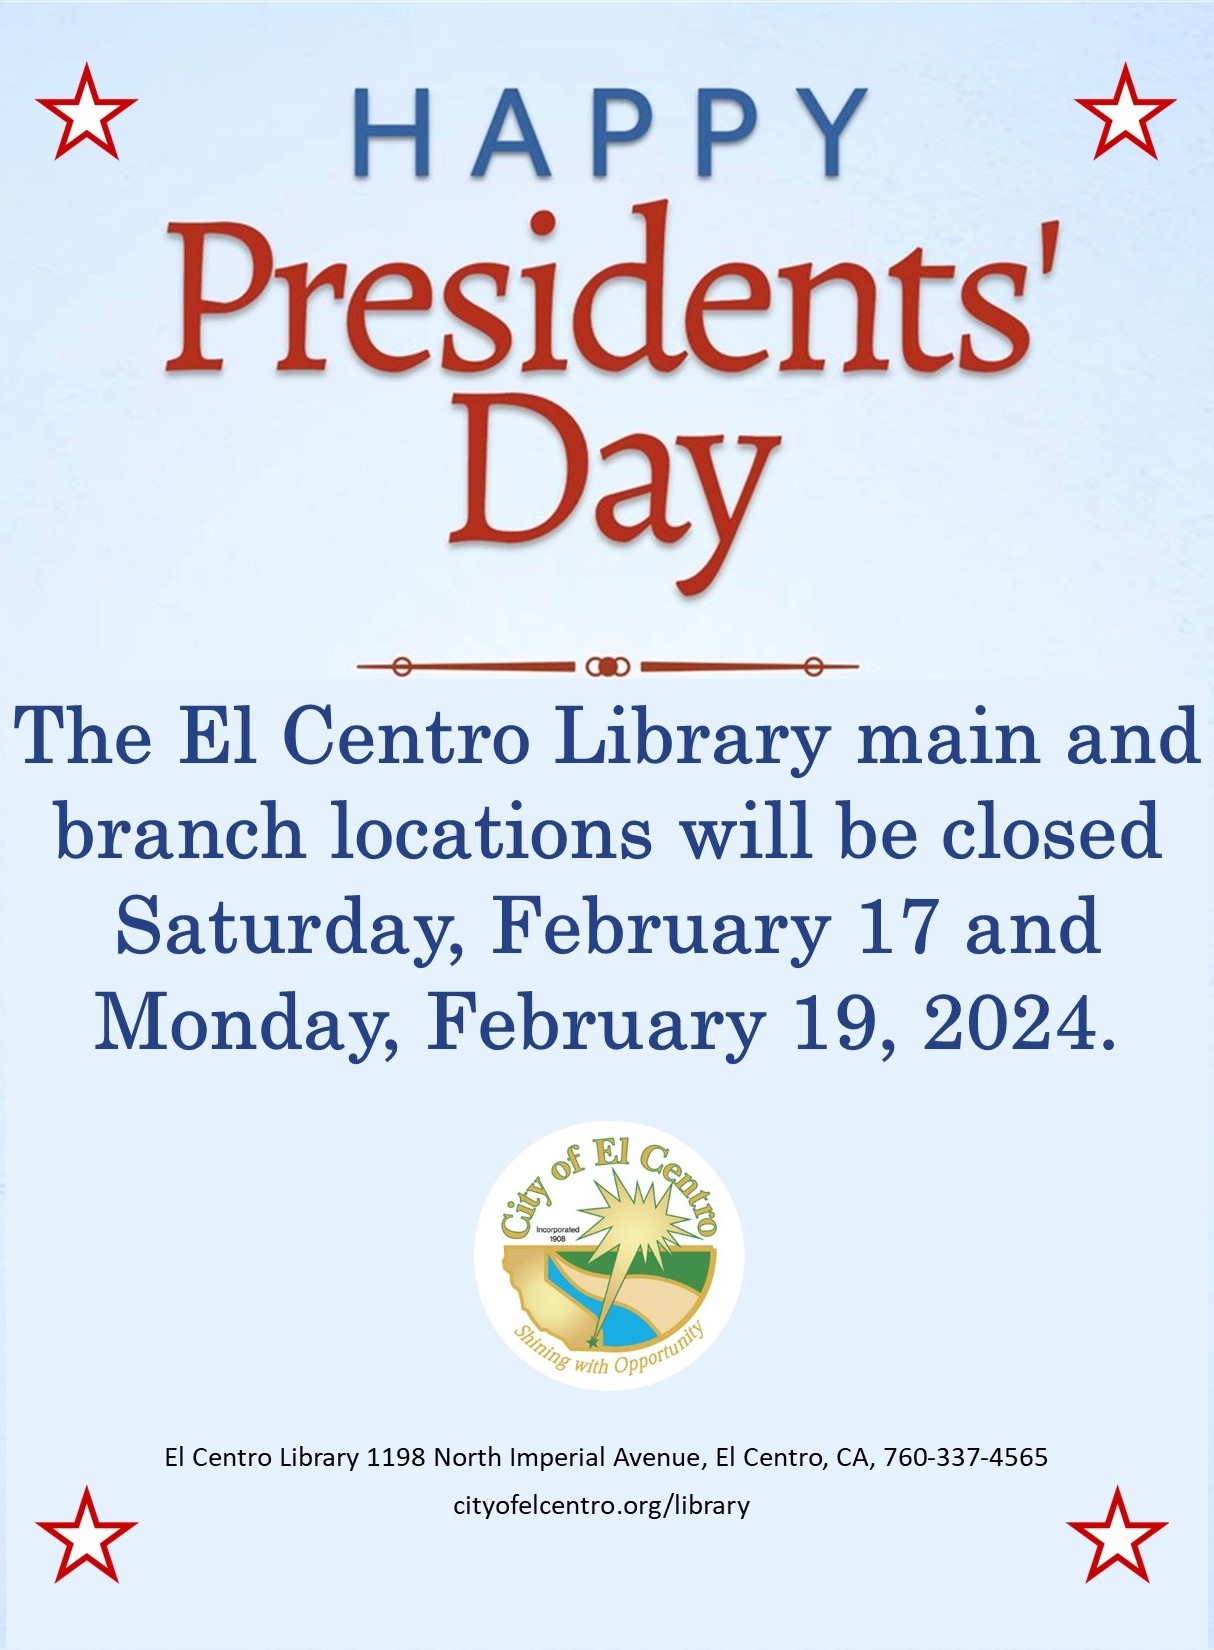 The El Centro Library main and branch locations will be closed Saturday, February 17 and Monday, February 19, 2024.
